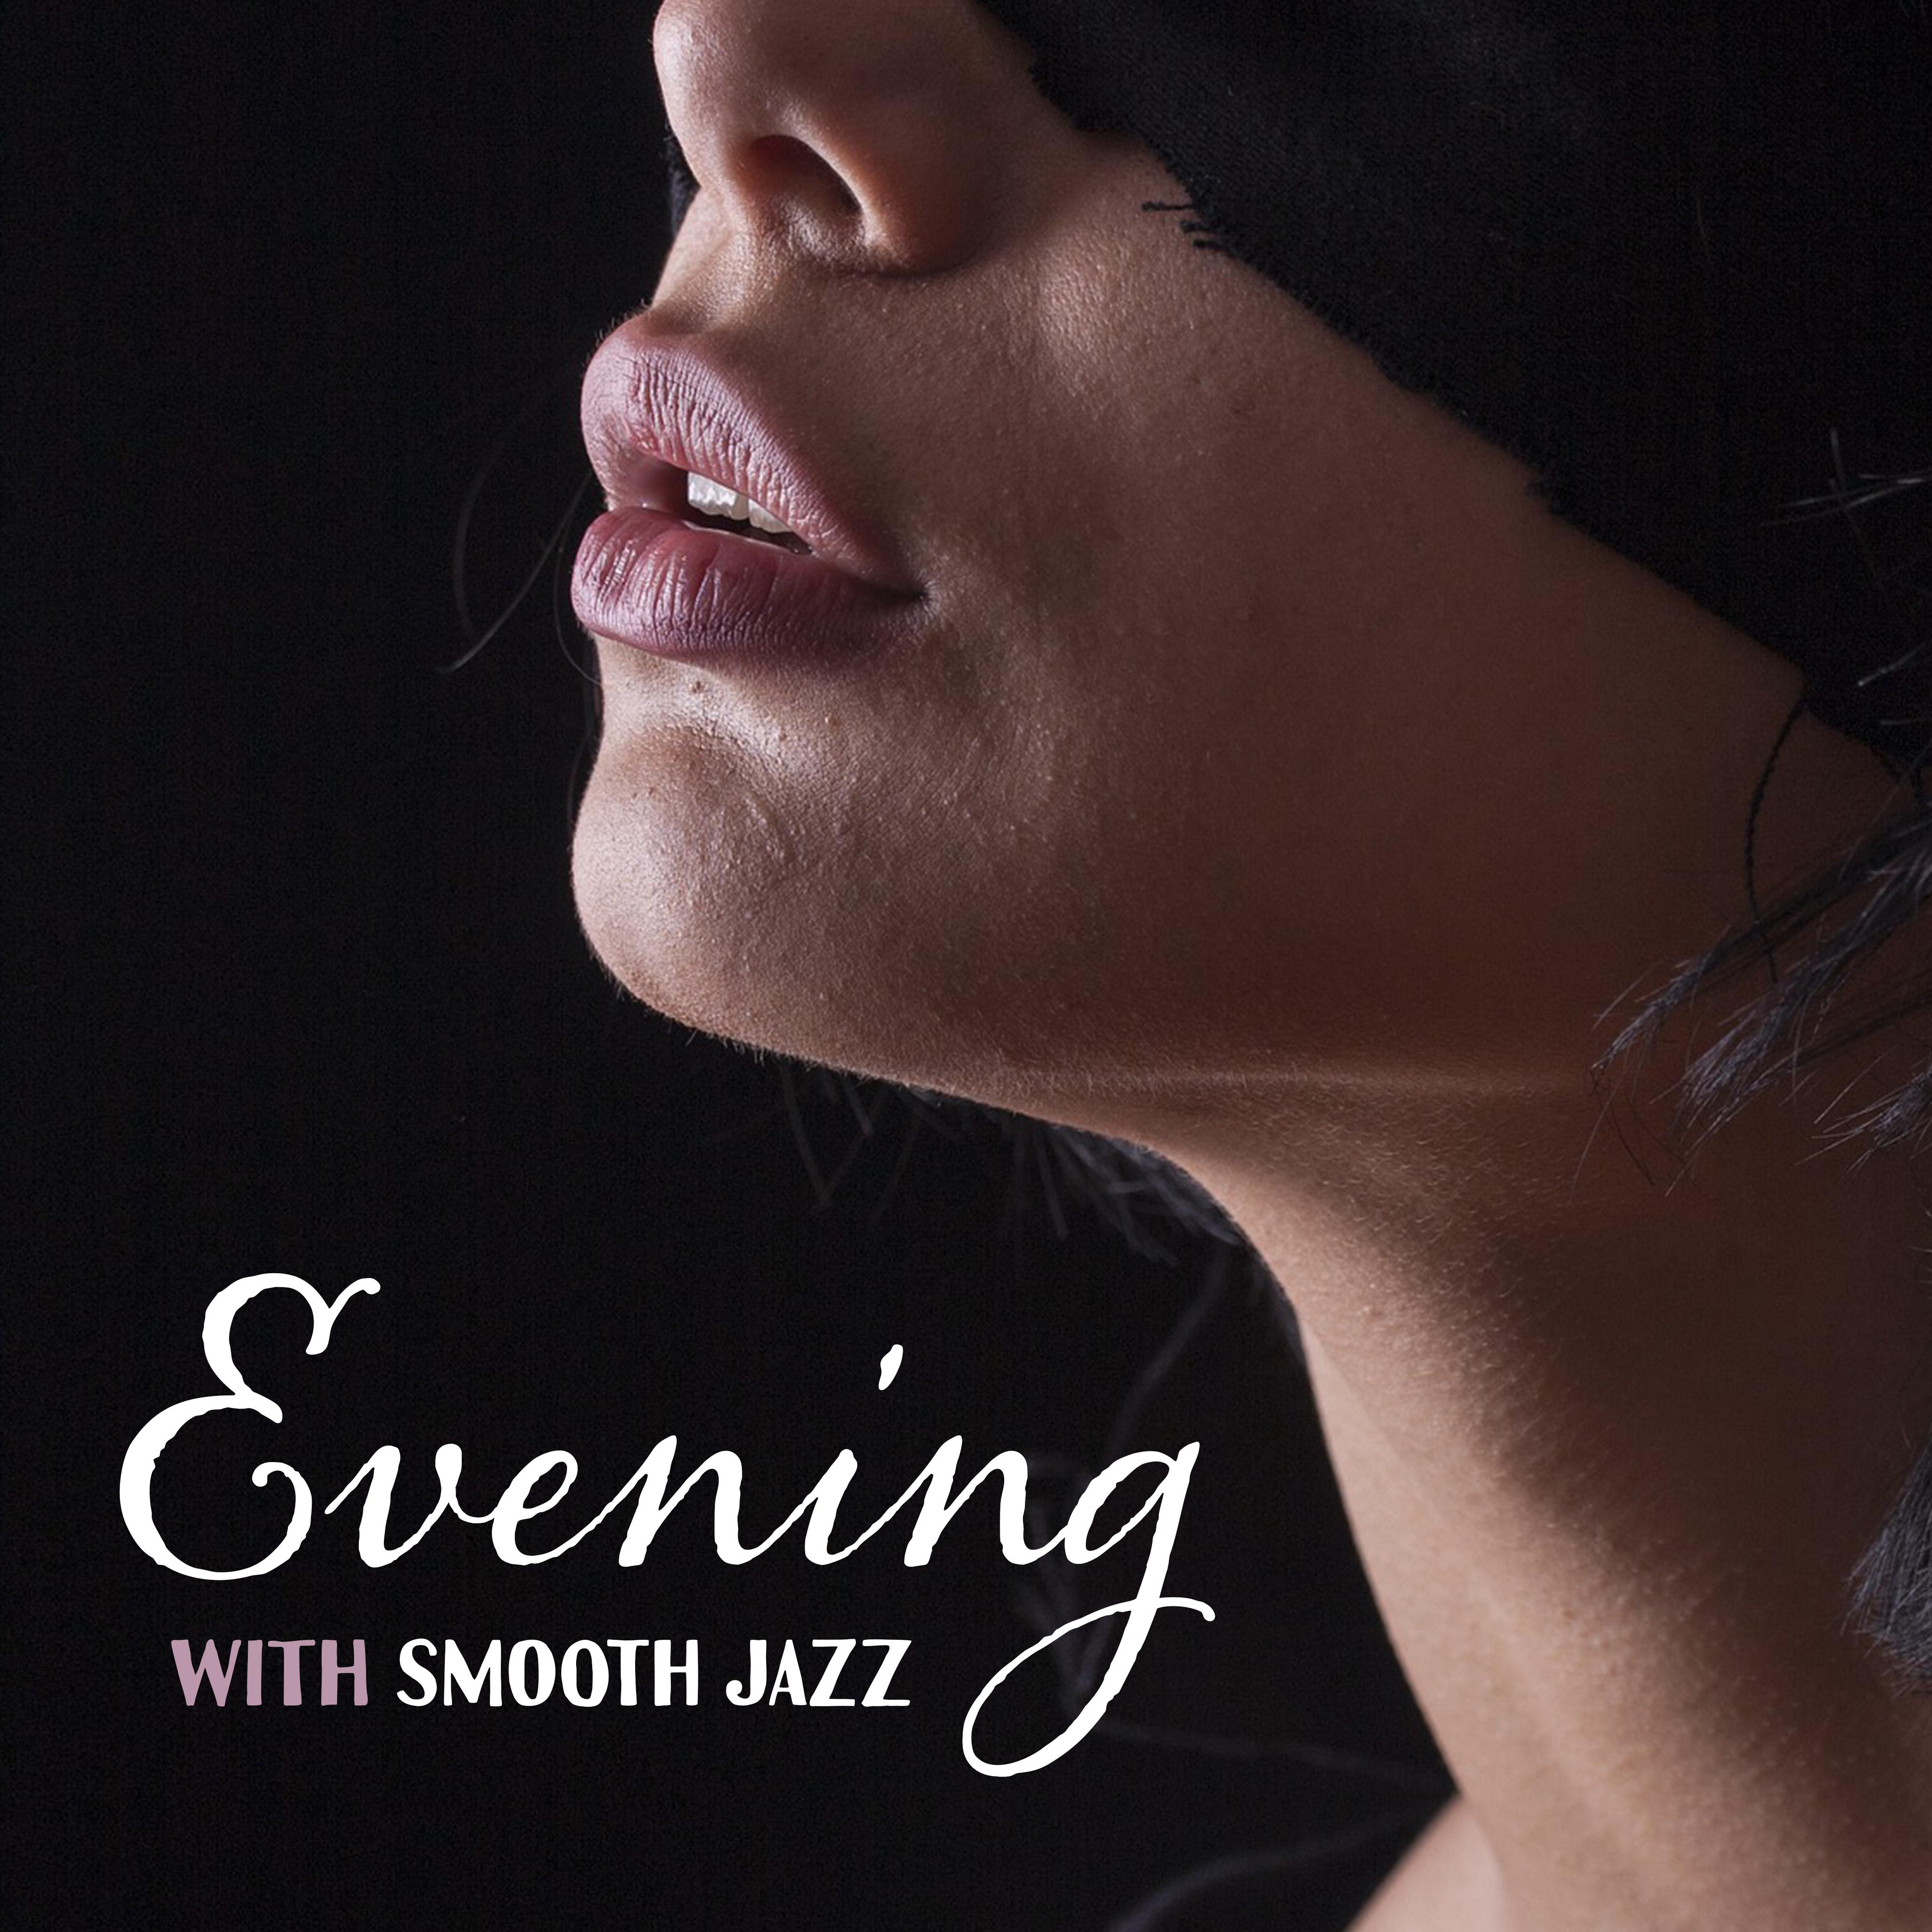 Evening with Smooth Jazz – Sensual Jazz Music, Romantic Relax for Two, Erotic Dreams, *** Music for Making Love